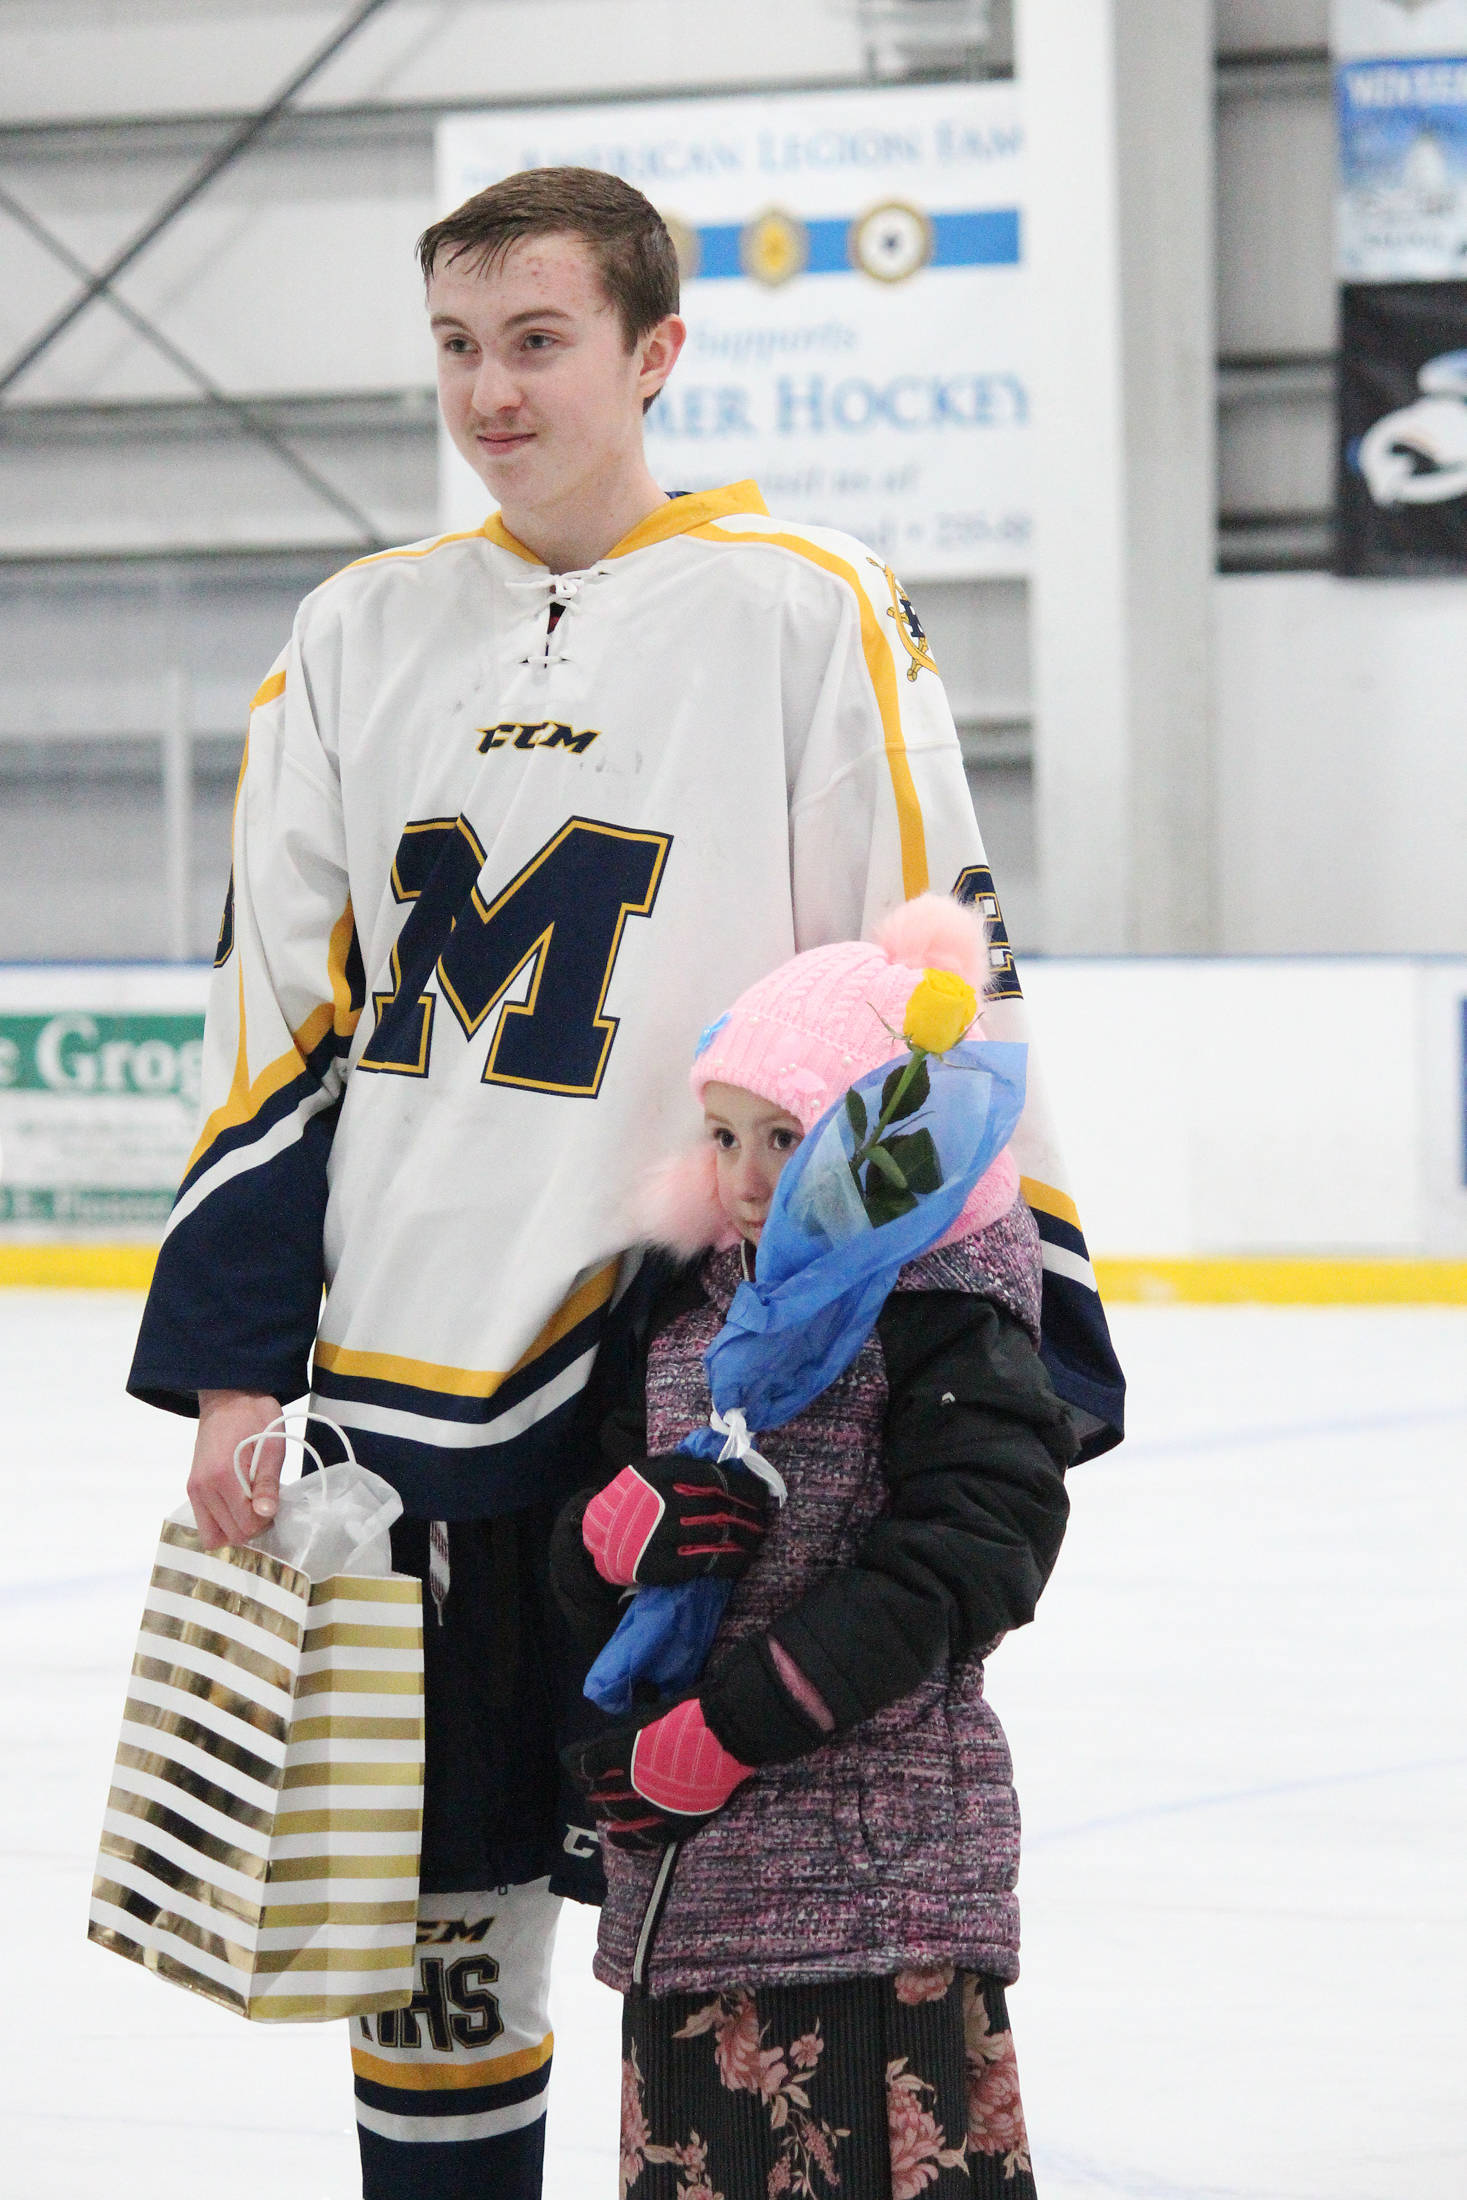 Homer senior Nikola Reutov is honored with his family on Senior Night for the Homer High School hockey team Thursday, Jan. 24, 2019 at Kevin Bell Arena in Homer, Alaska. The Mariners defeated Houston High School 10-1. (Photo by Megan Pacer/Homer News)